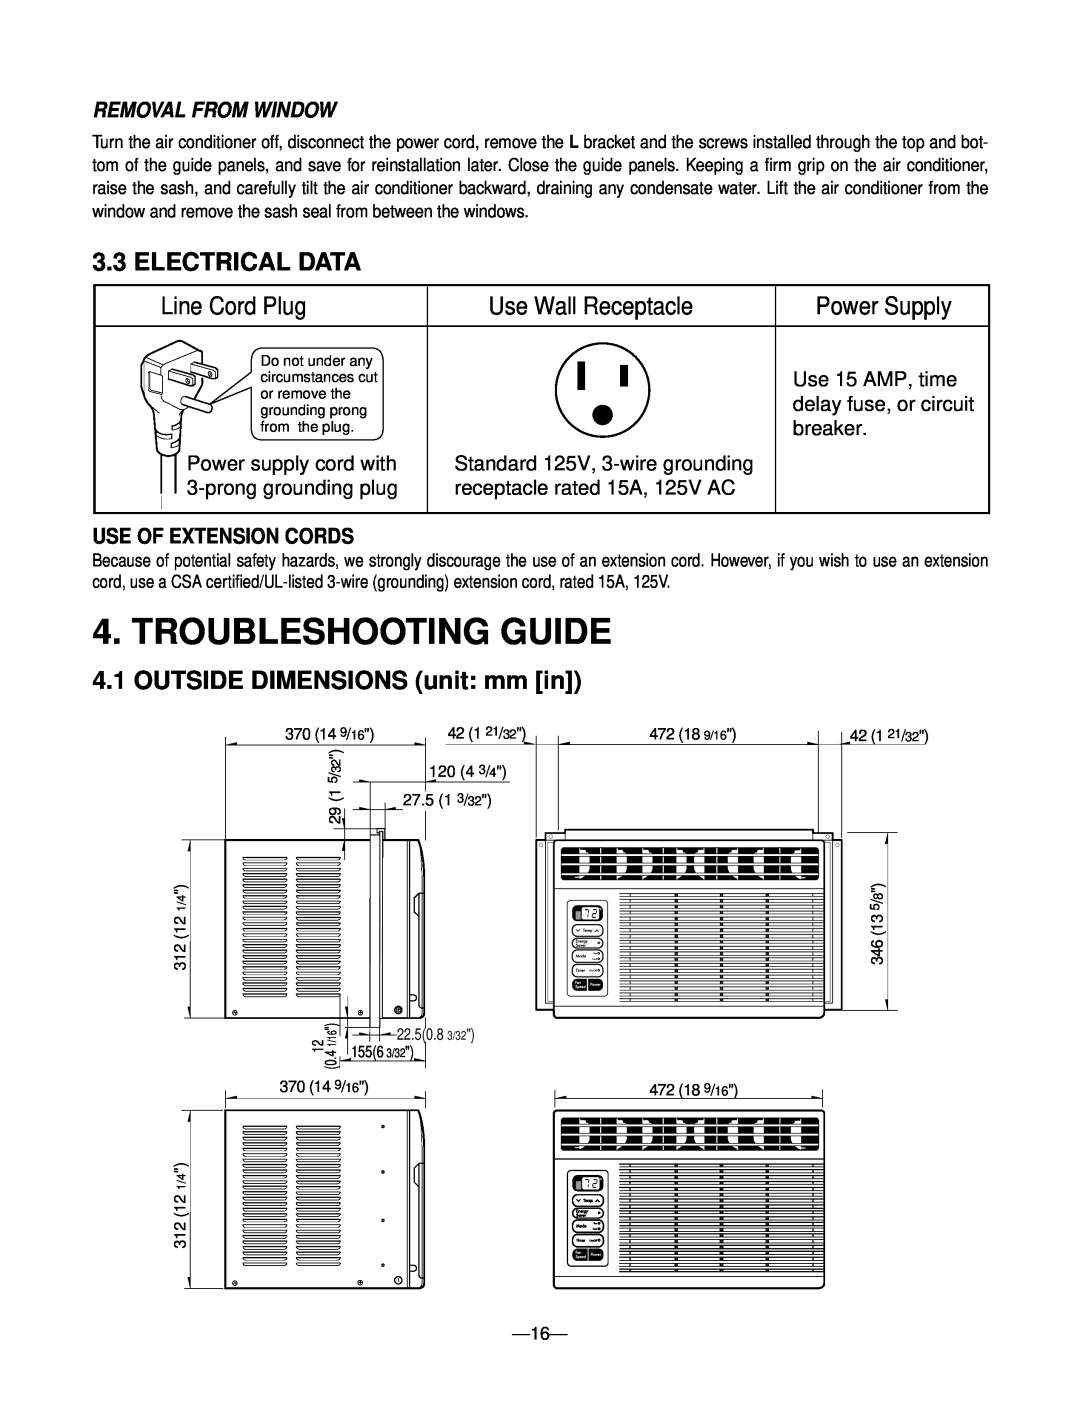 Goldstar M5403R Troubleshooting Guide, Electrical Data, OUTSIDE DIMENSIONS unit mm in, Removal From Window, breaker 